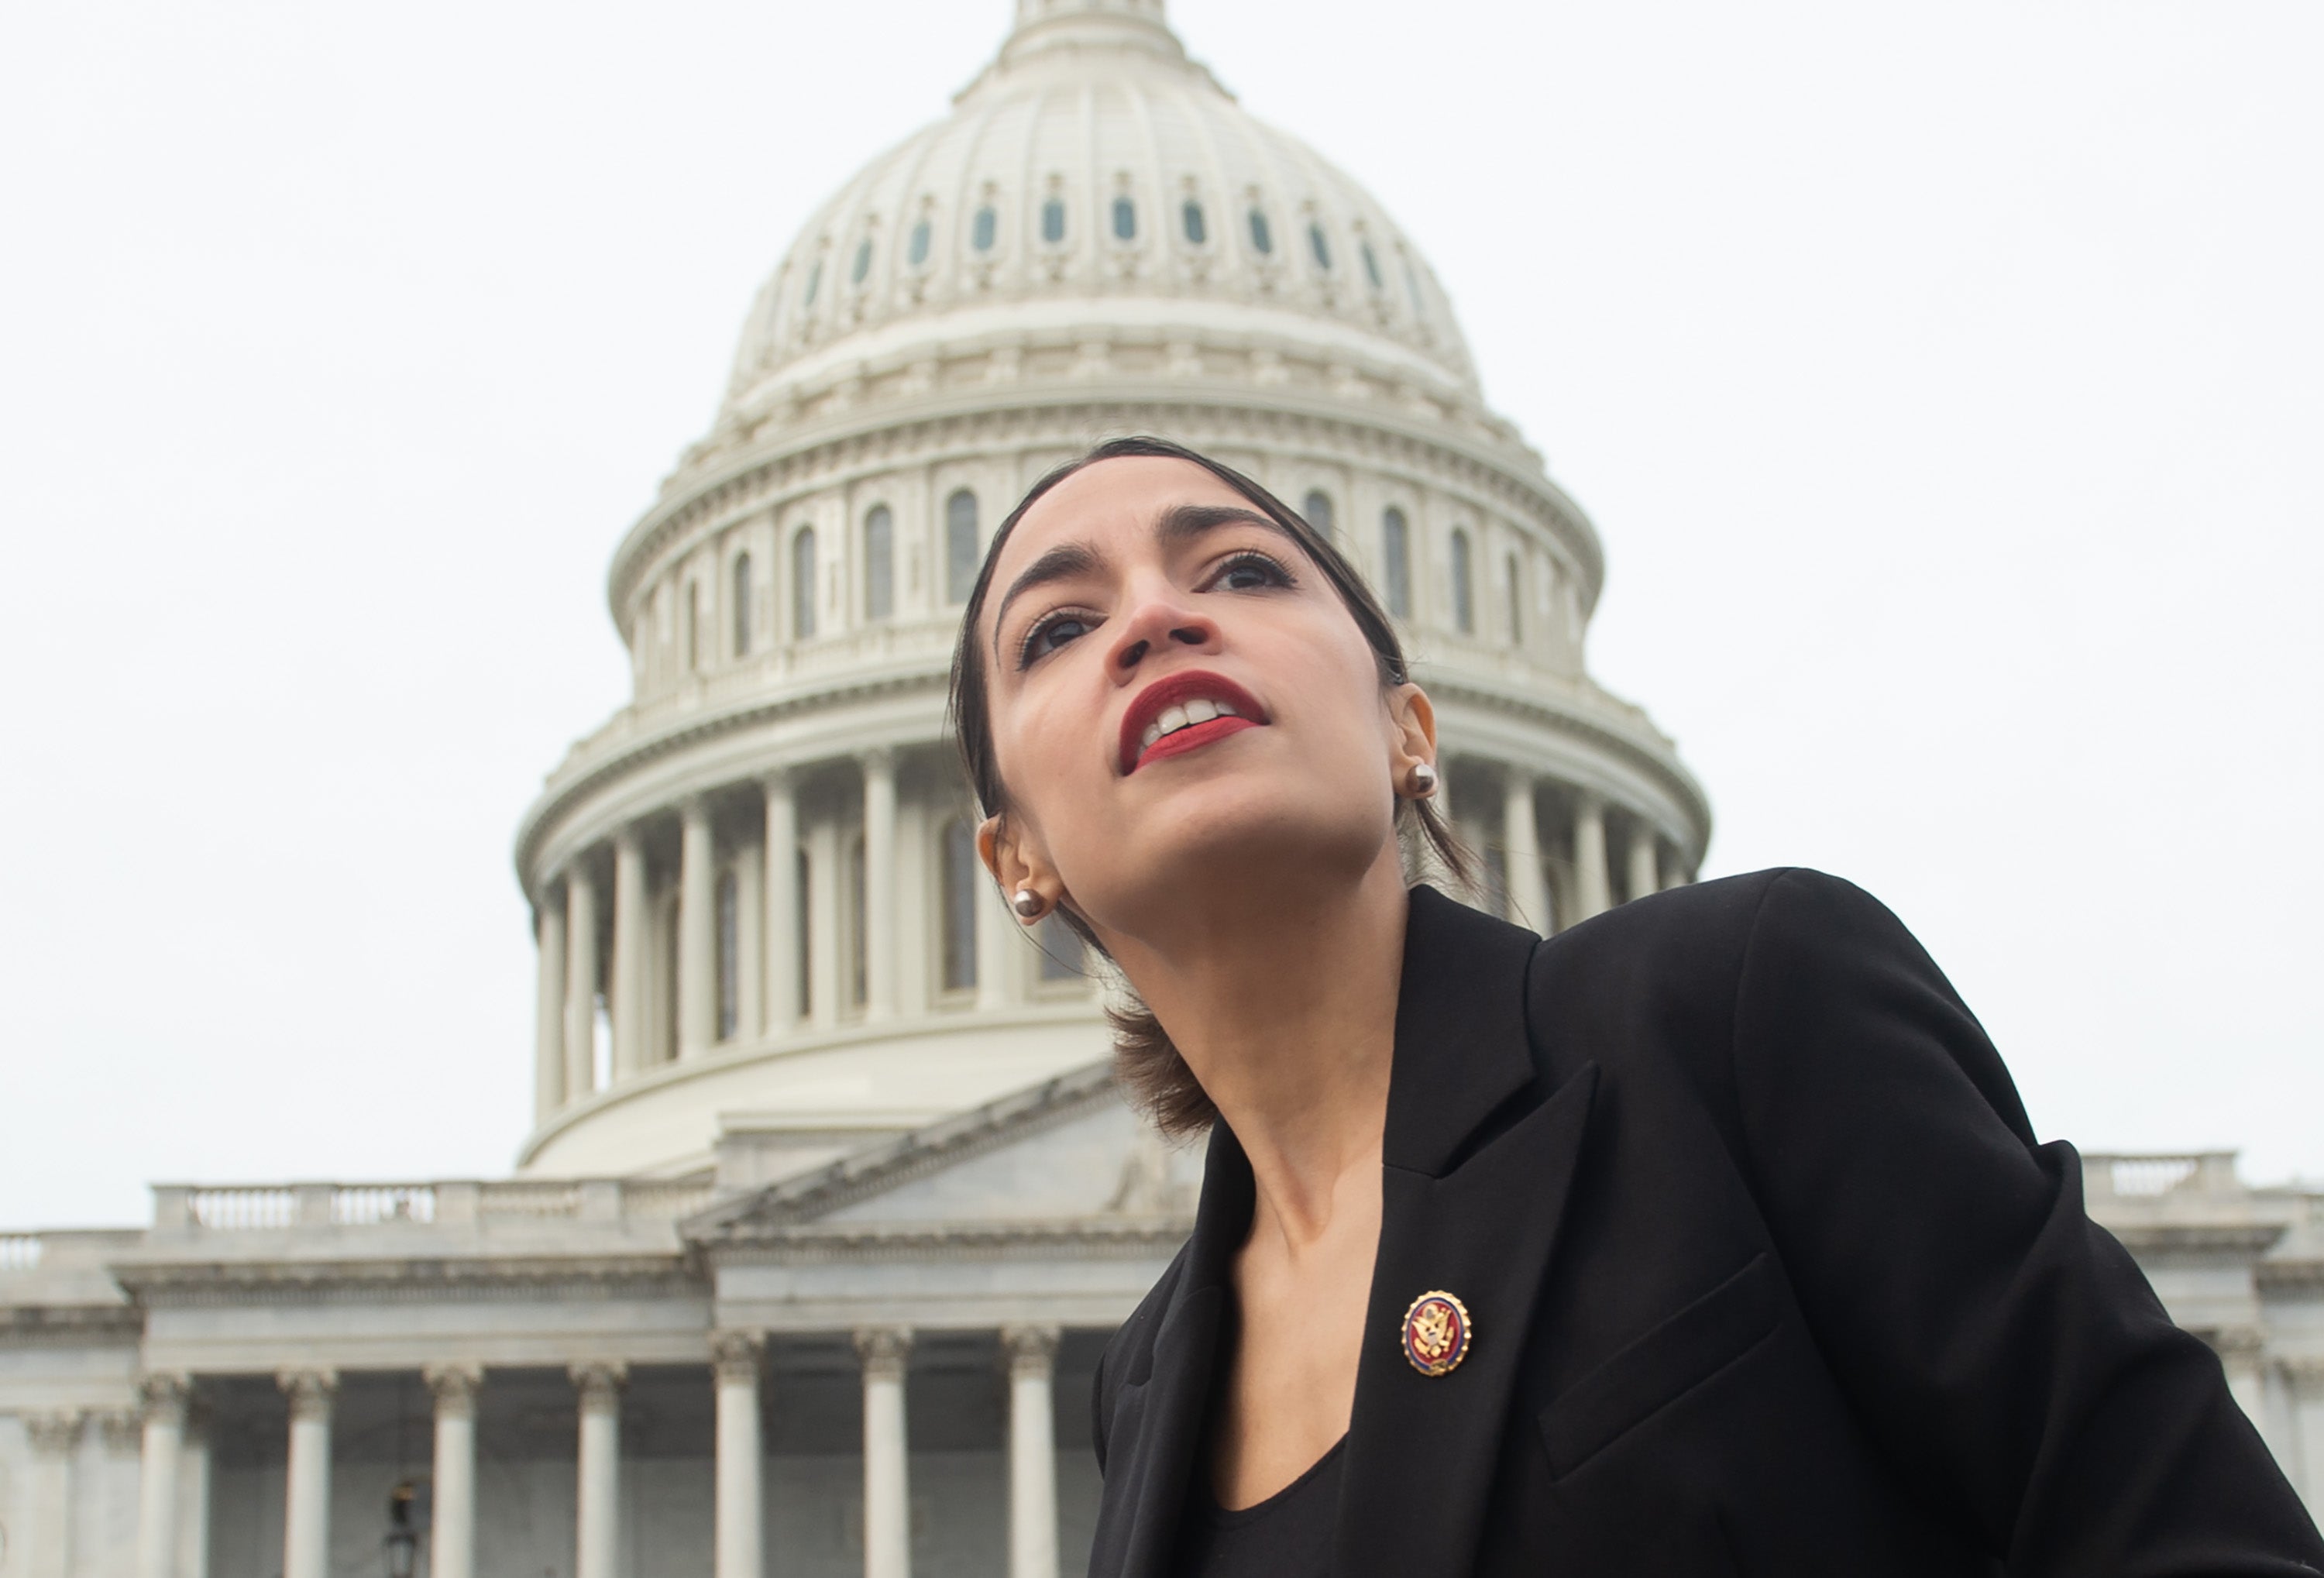 US Representative Alexandria Ocasio-Cortez, Democrat of New York, leaves a photo opportunity with the female Democratic members of the 116th US House of Representatives outside the US Capitol in Washington, DC, January 4, 2019